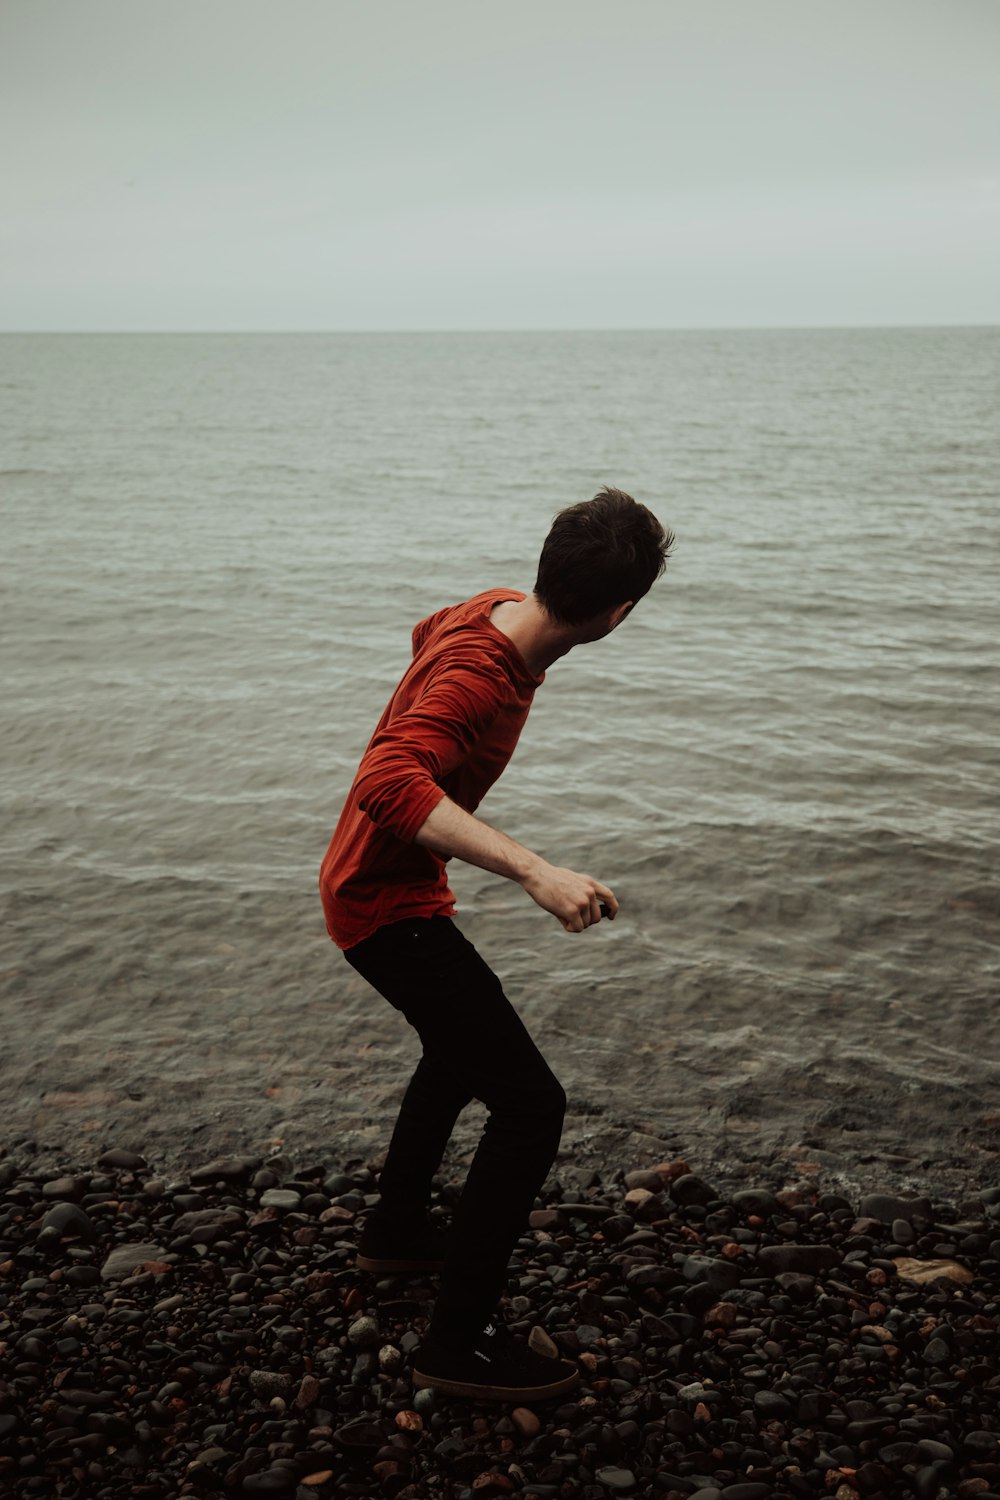 man wearing red shirt about to throw stone on ocean